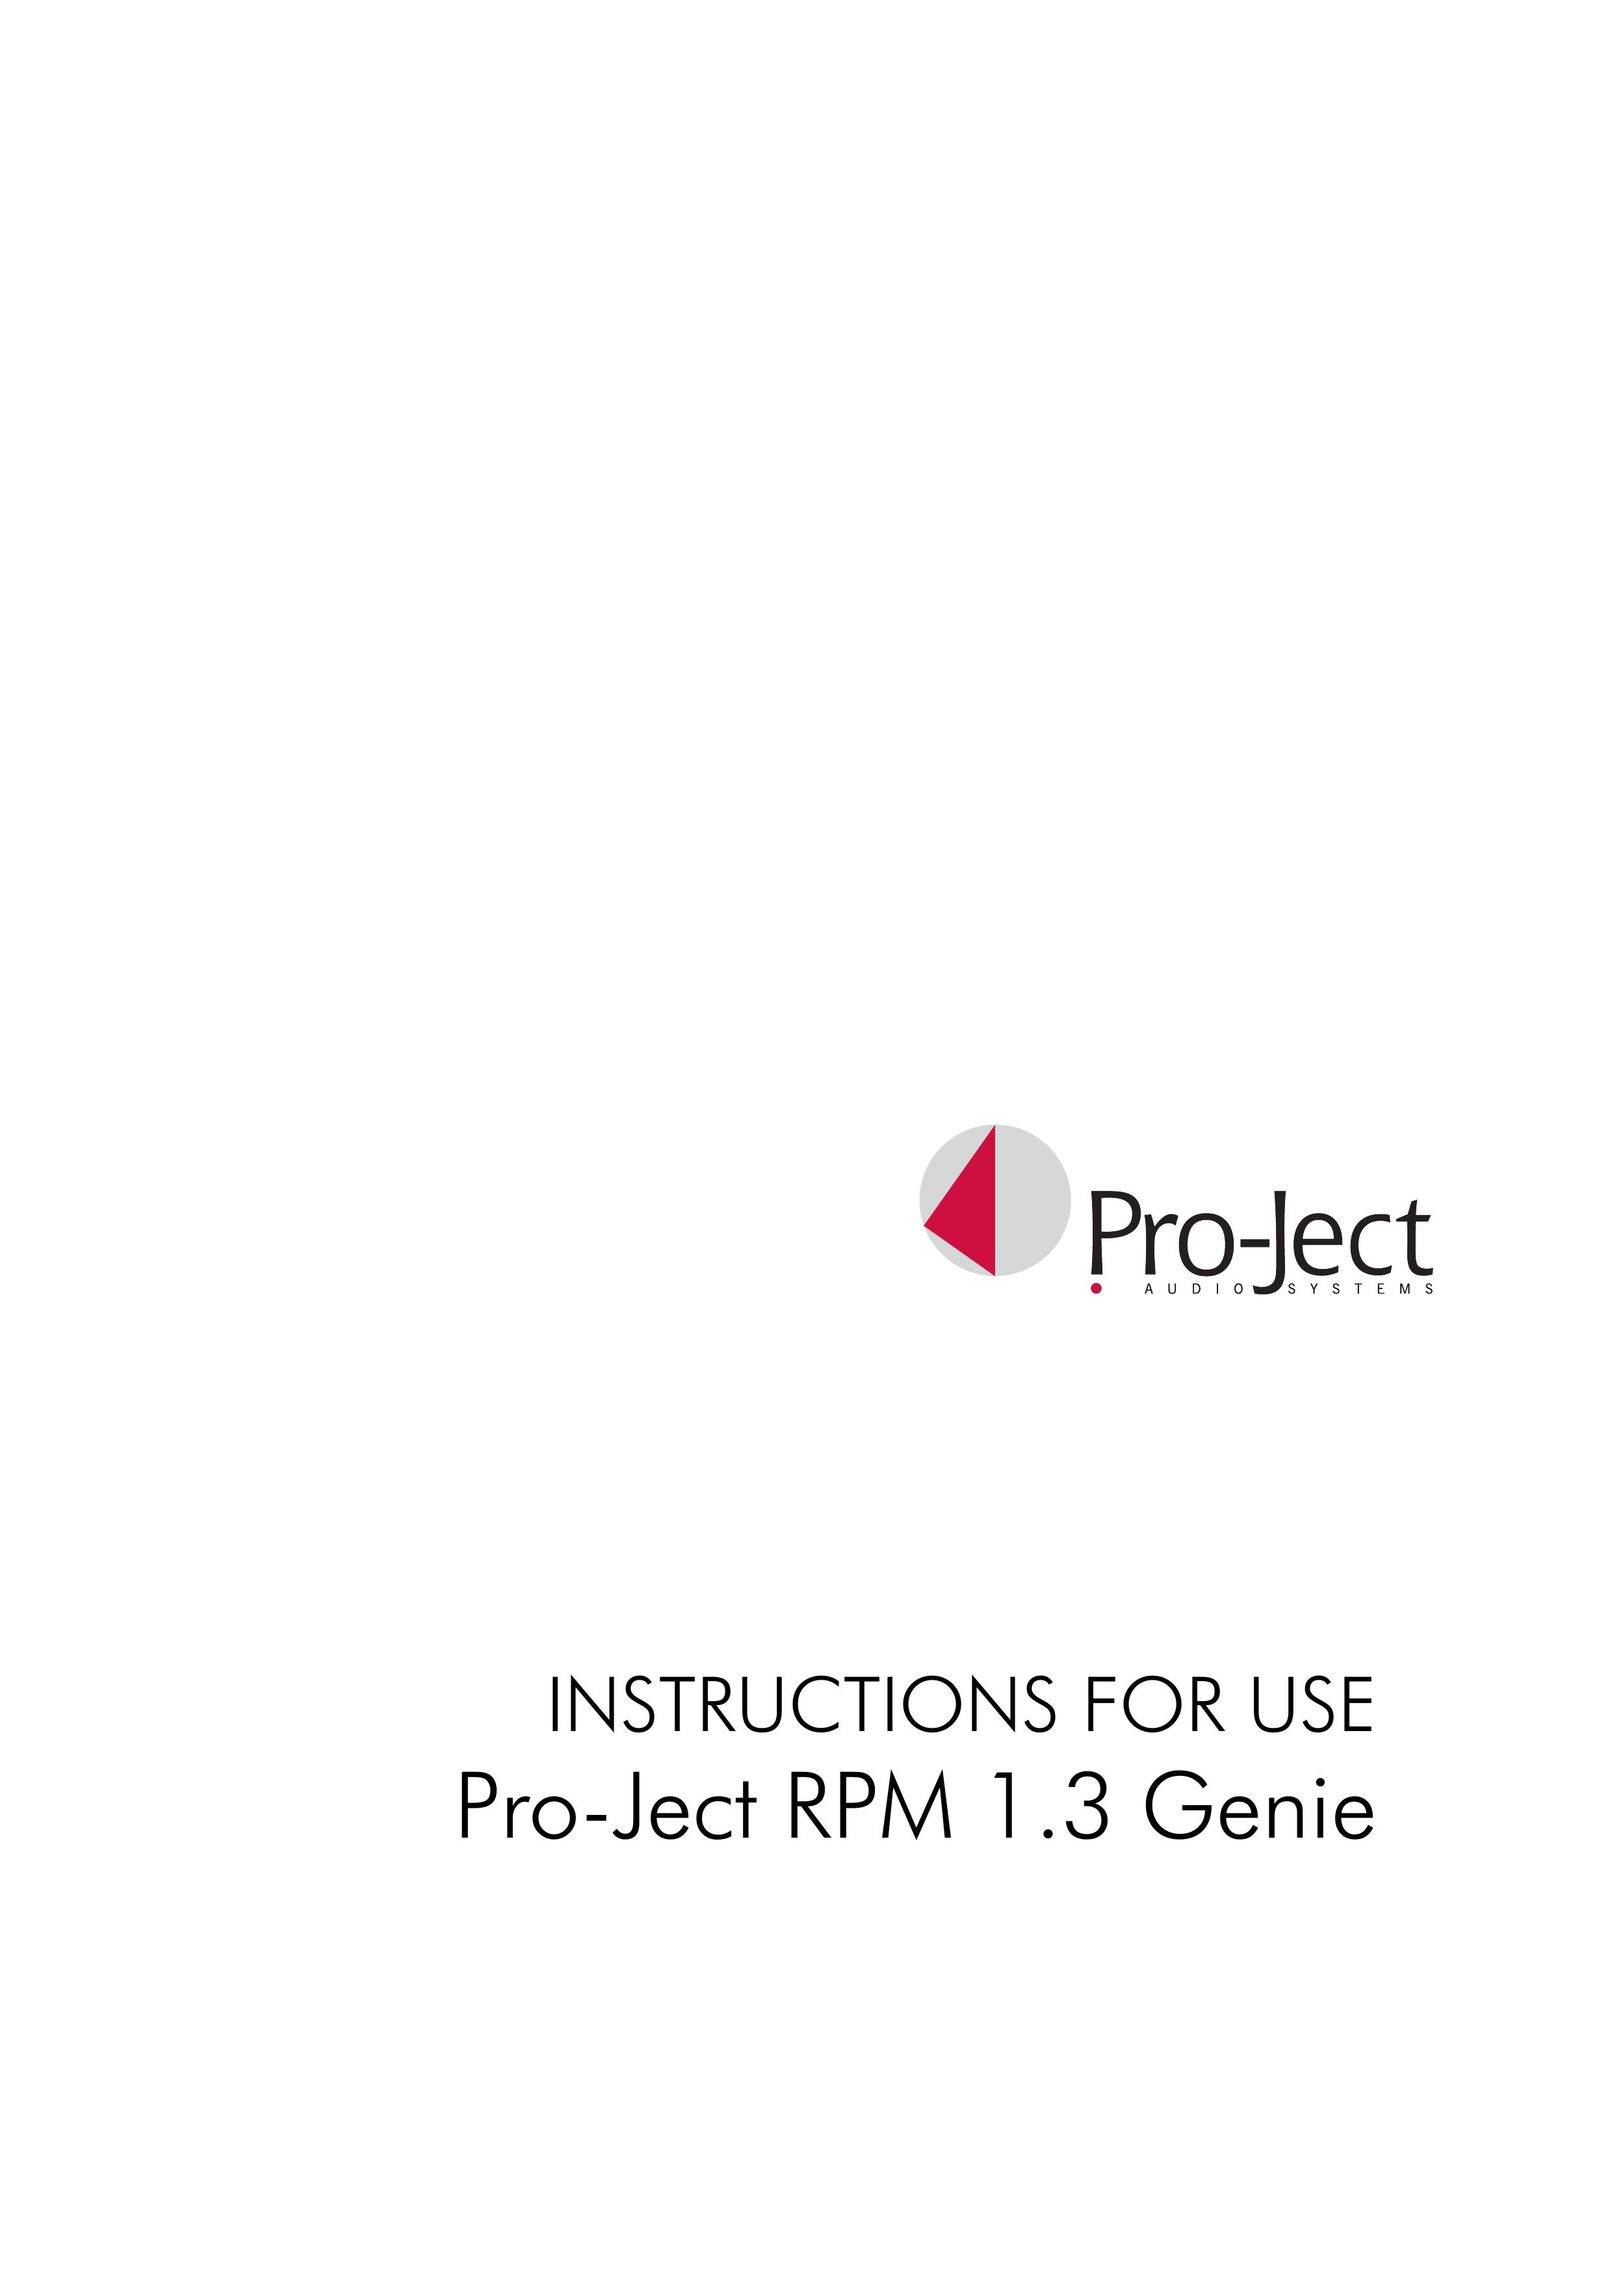 Pro-Ject Pro-Ject RPM 1.3 Genie Turntable User Manual